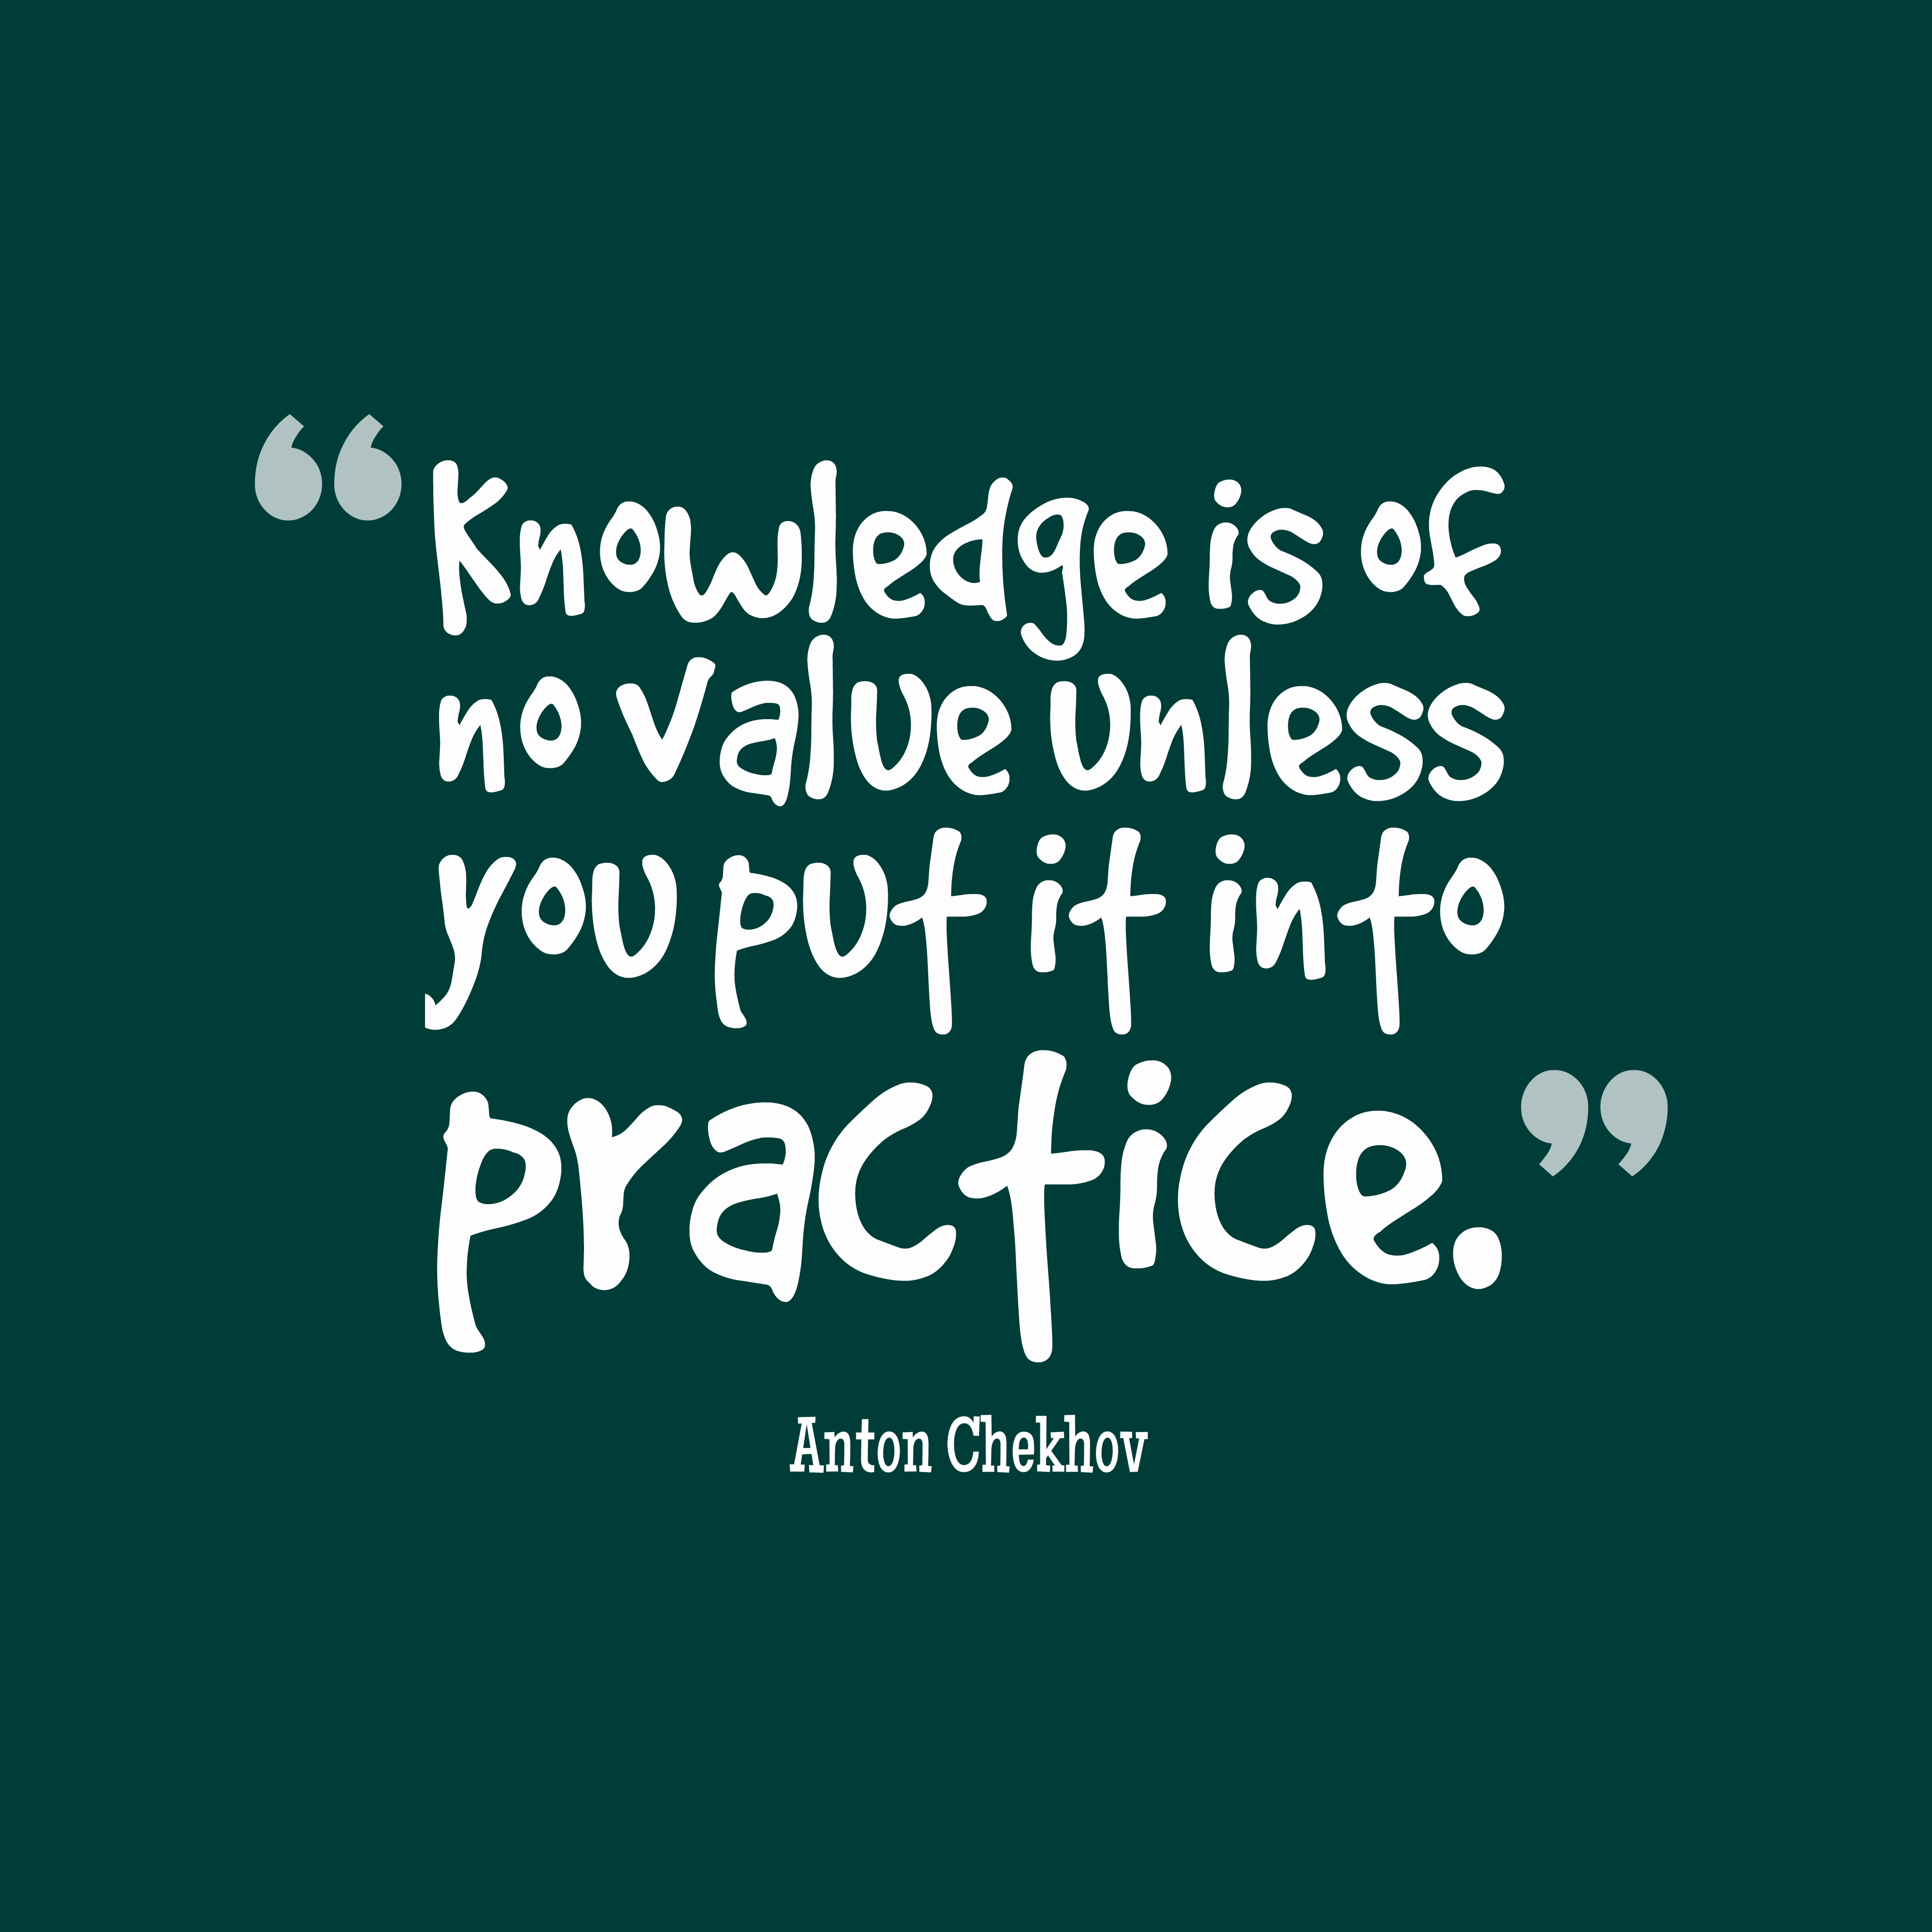 Knowledge is of no value unless you put it into practice. Anton Chekhov